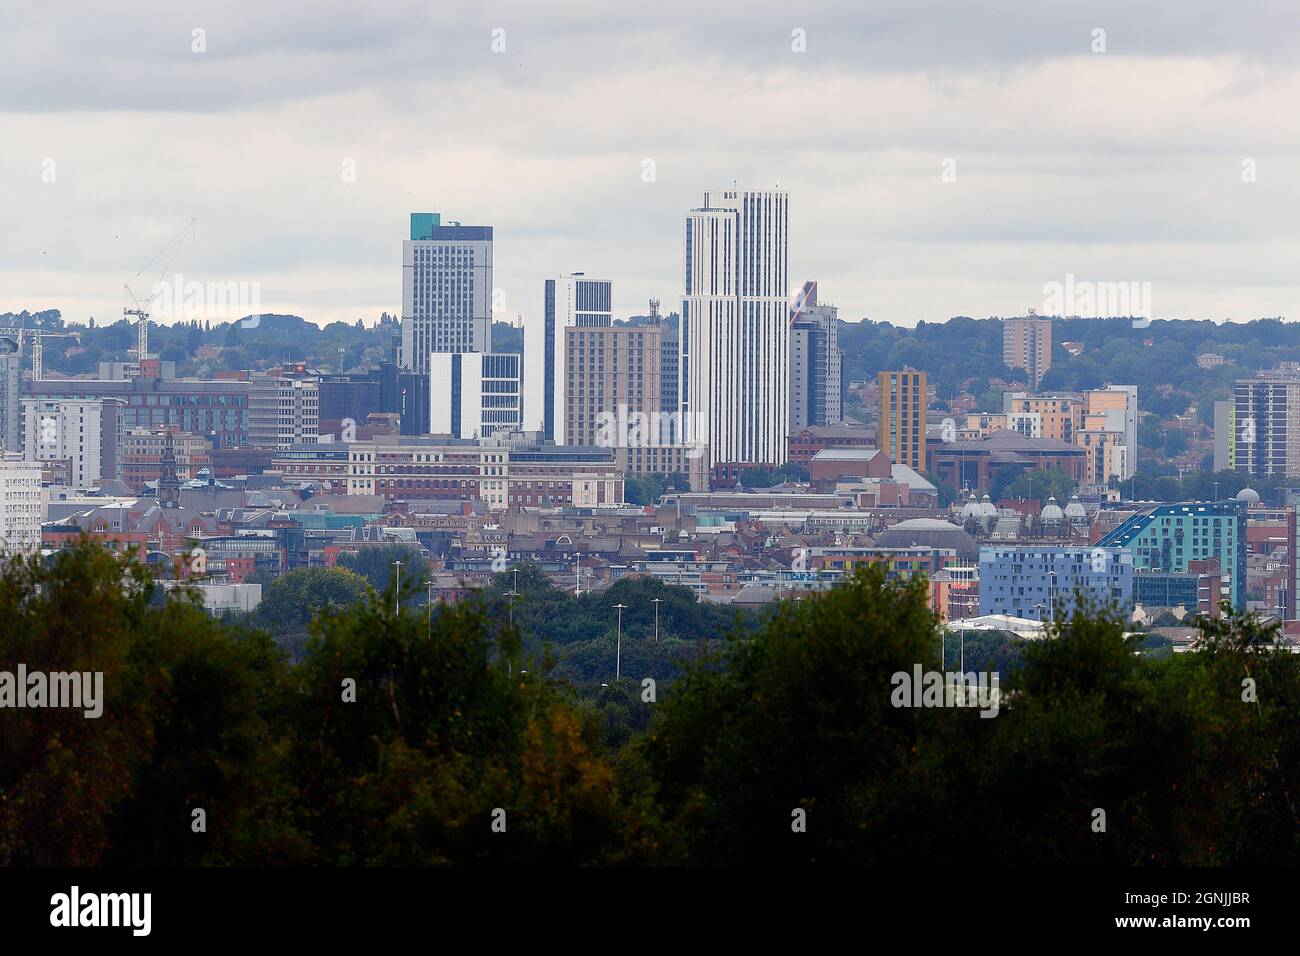 Leeds City Centre viewed from Middleton. Sky Plaza building (left) is 106m & Altus House (right) is 116m & is now Yorkshire's tallest building. Stock Photo